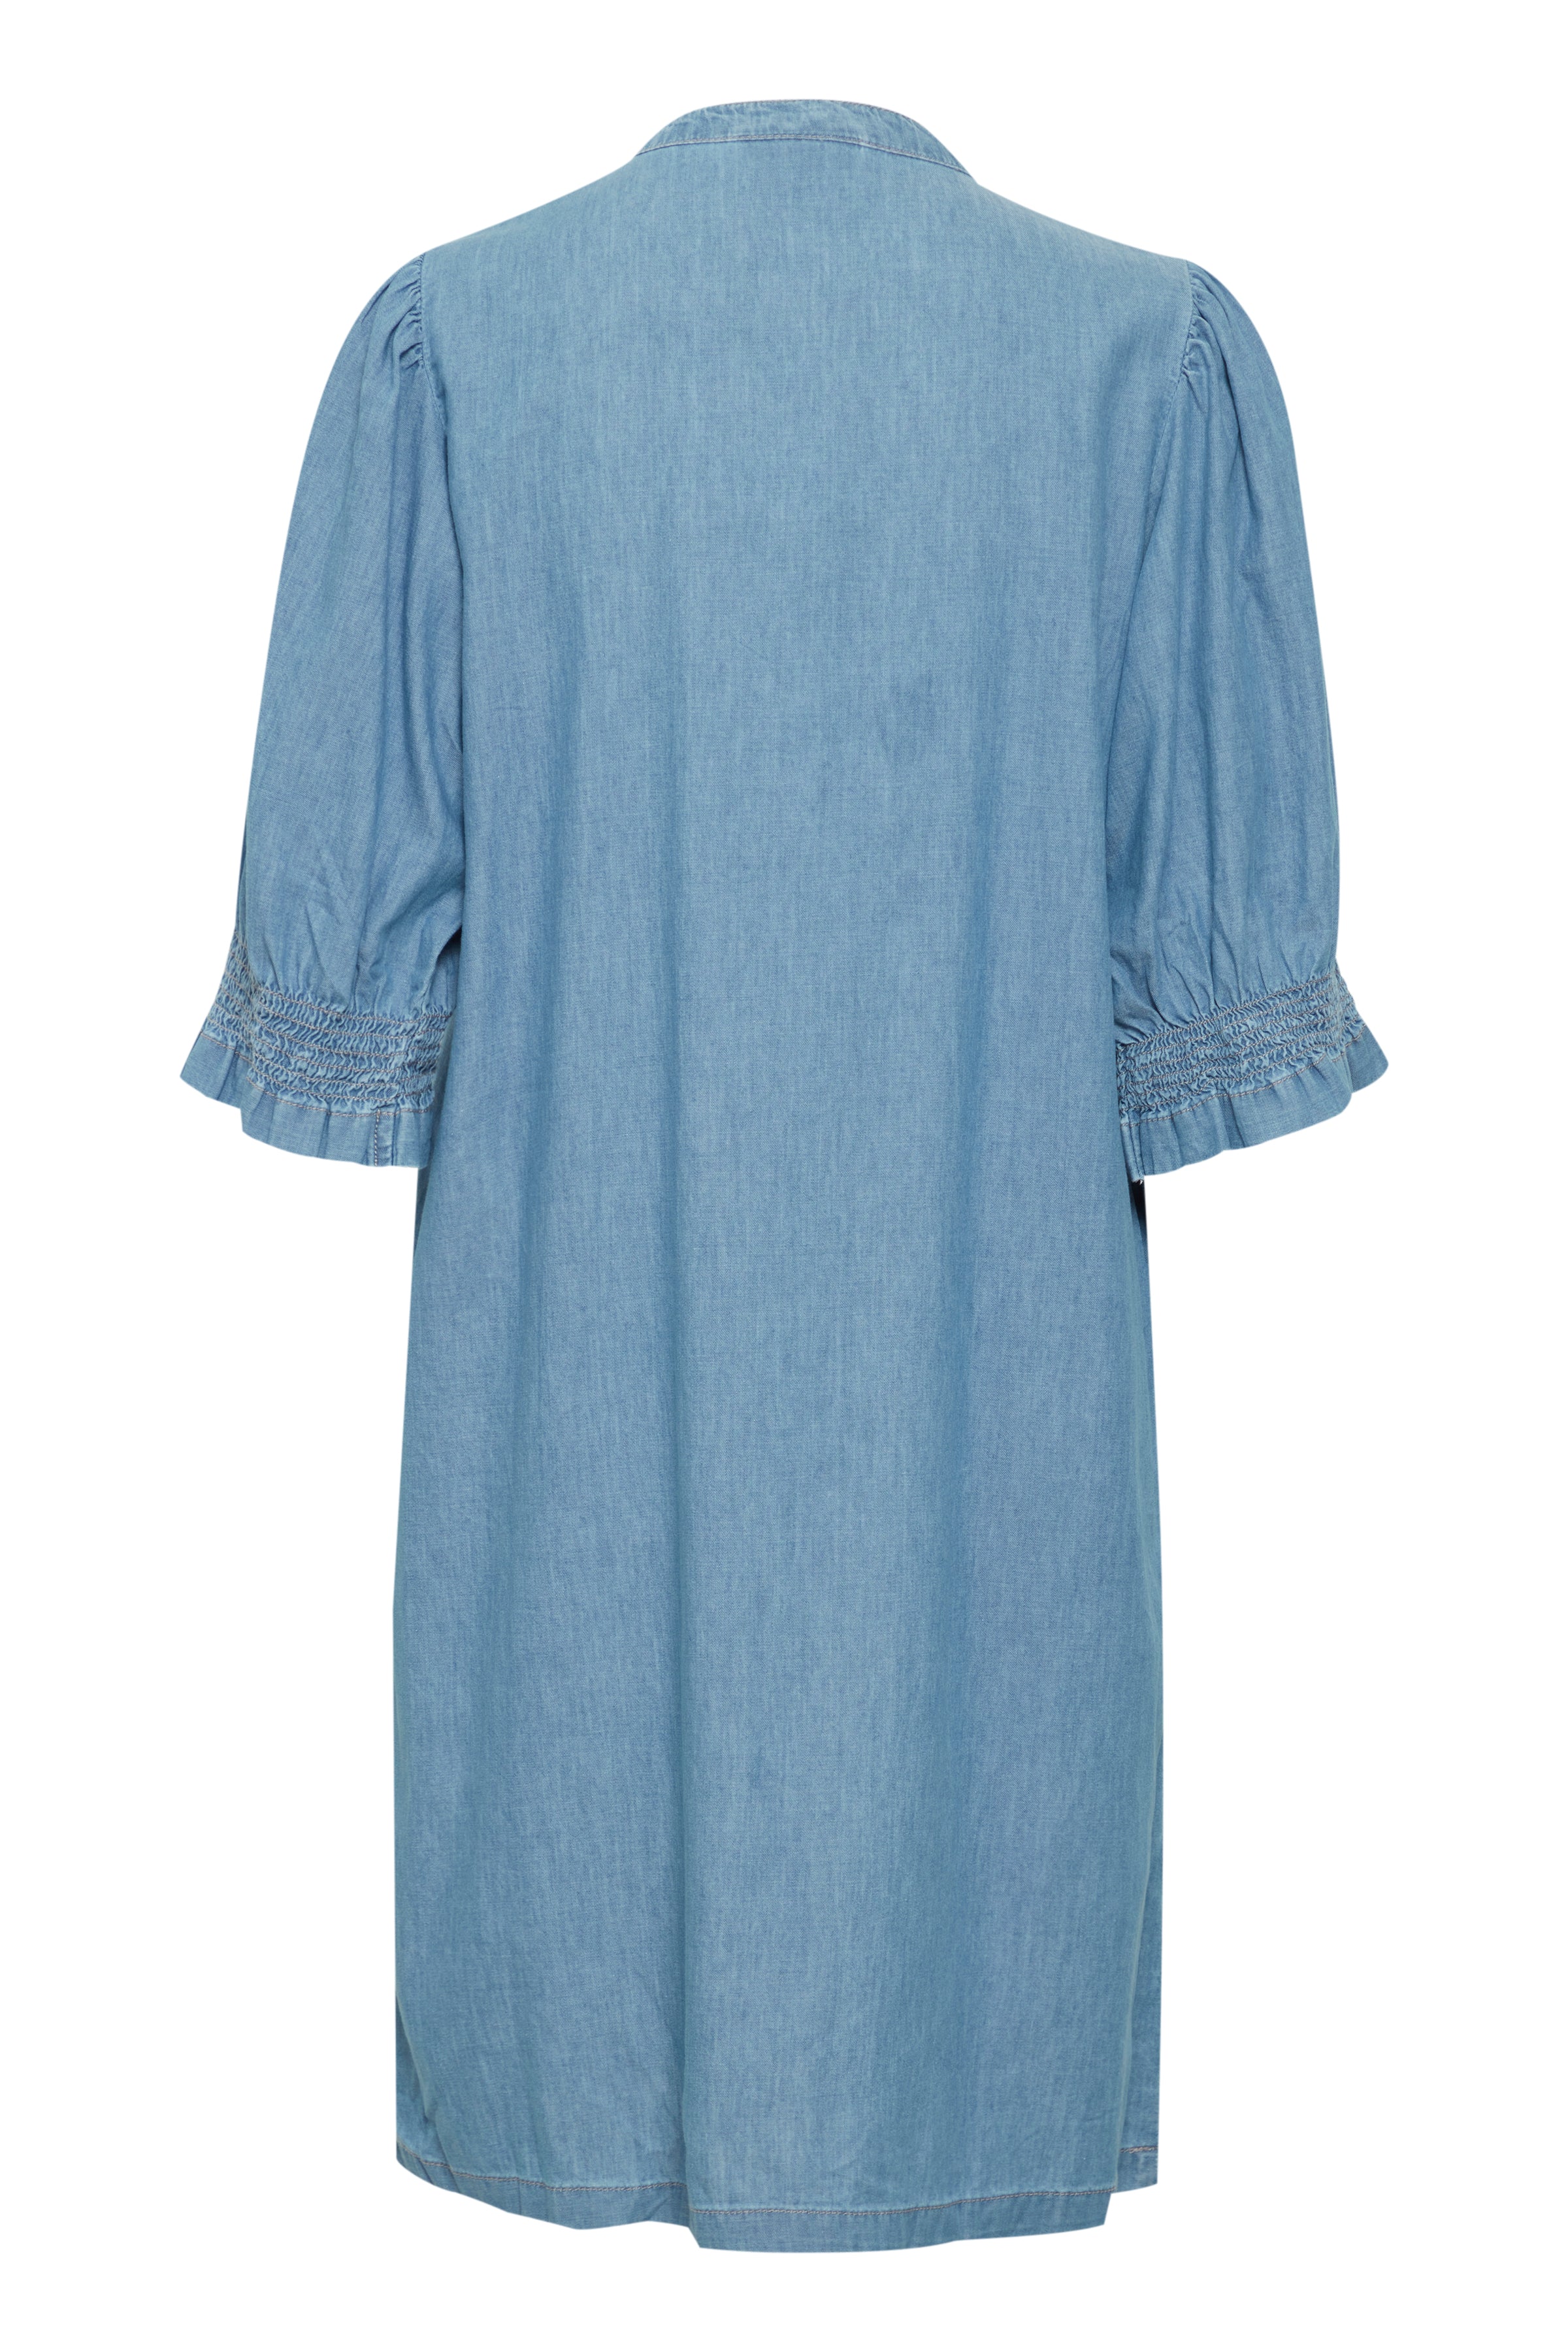 Ancey Dress in Washed Blue